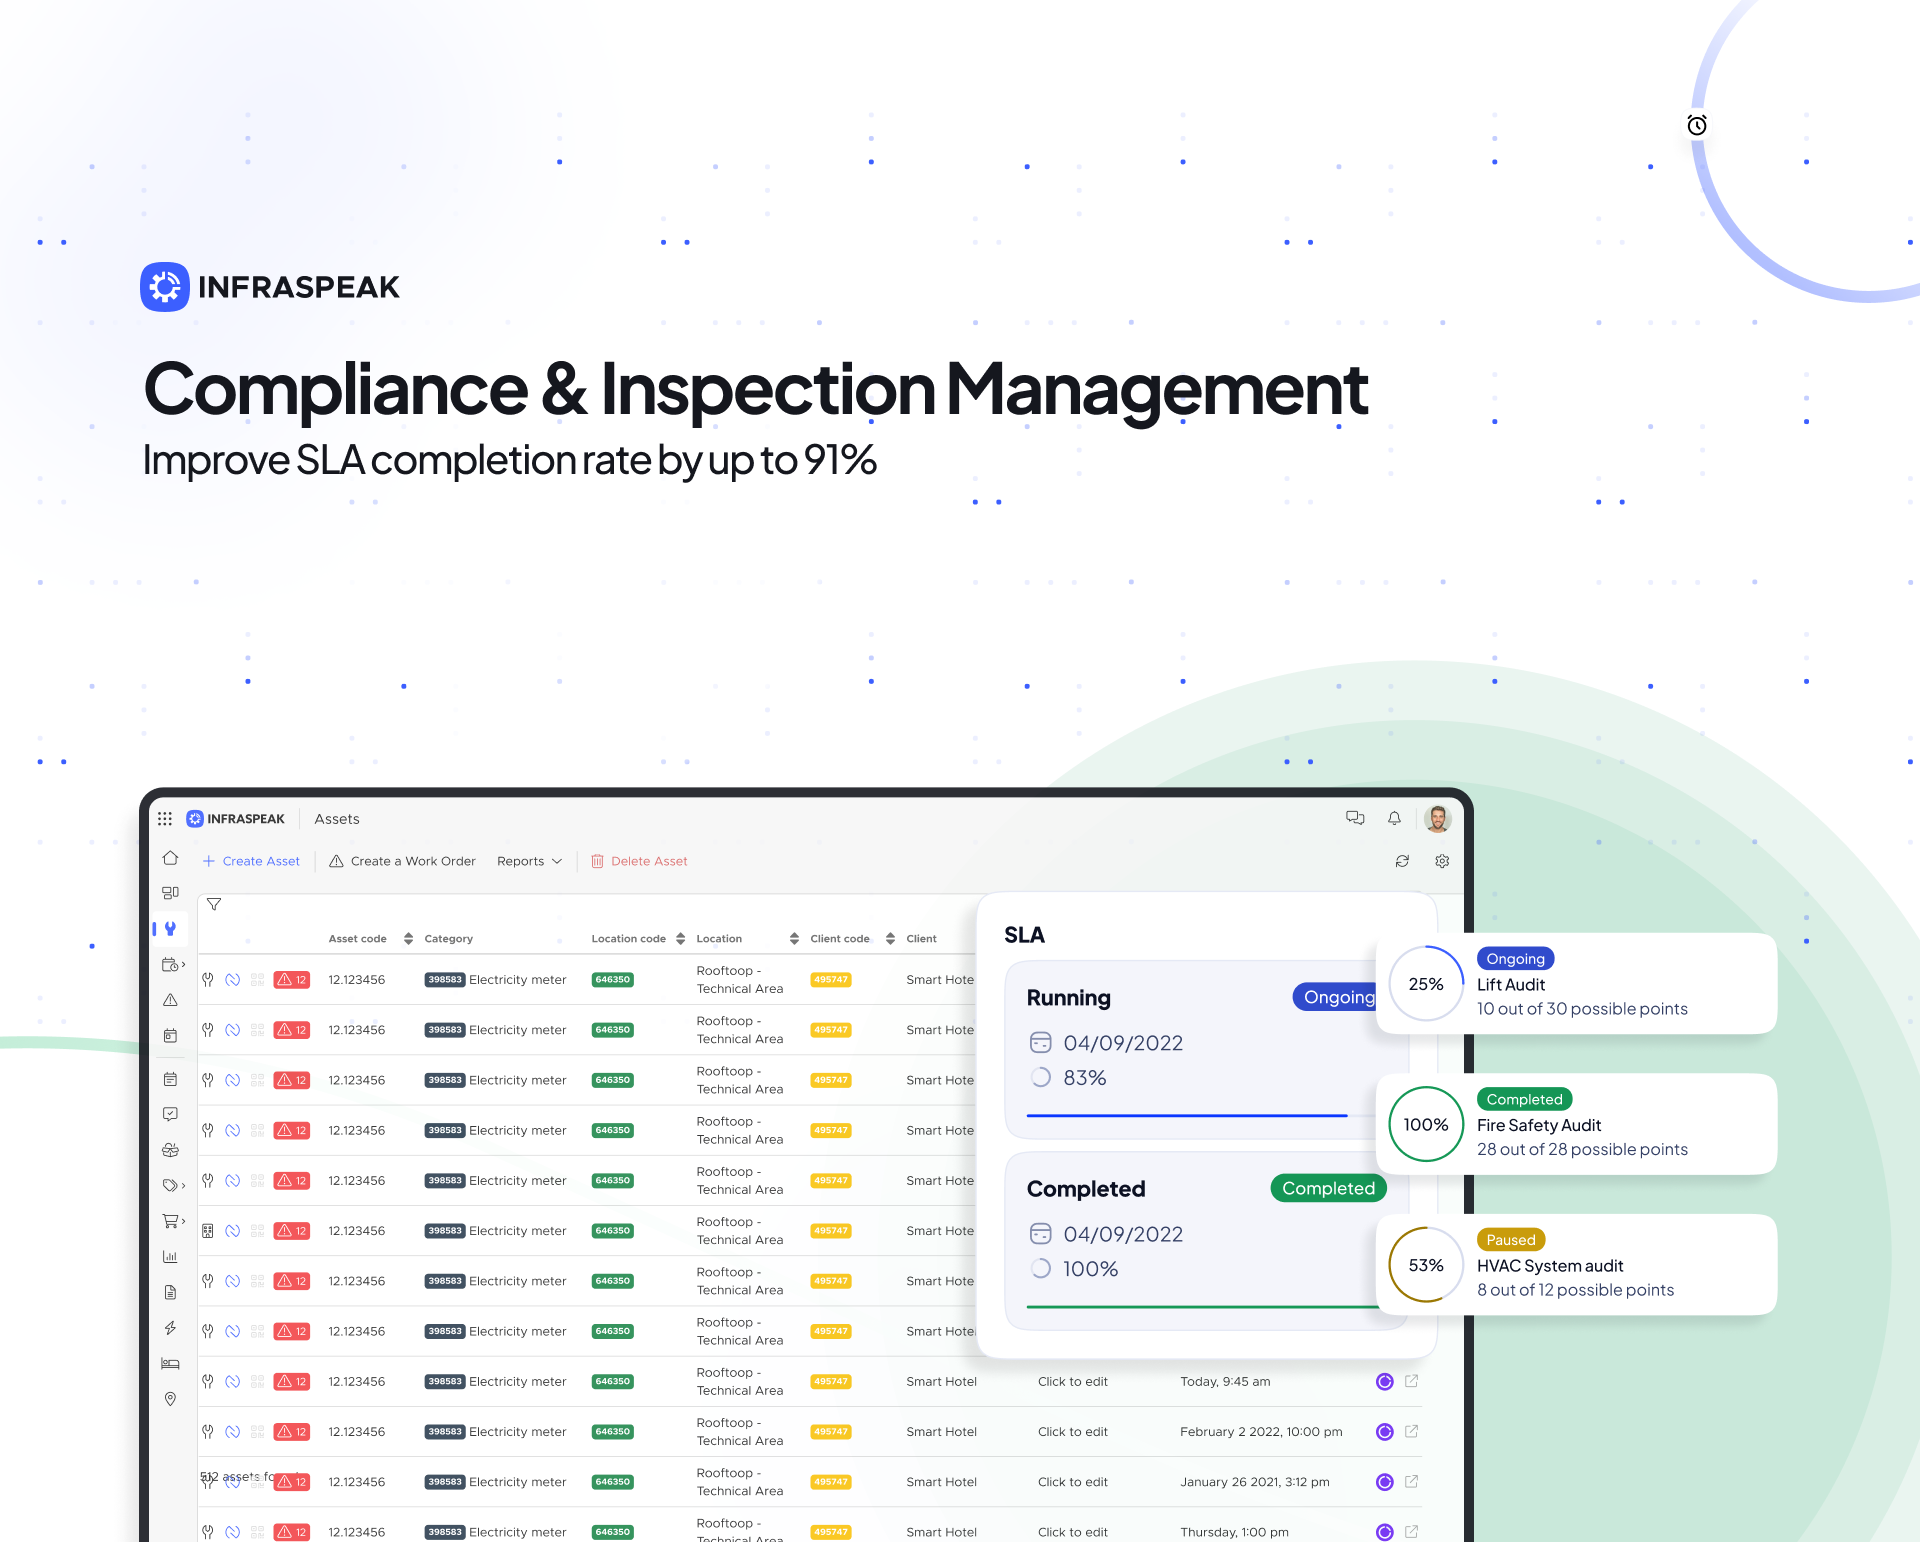 Create flawless preventive maintenance plans, custom audits and risk assessments for each asset, ensuring compliance with previously established SLAs and legal regulations. Run fire, health & safety checks seamlessly!
